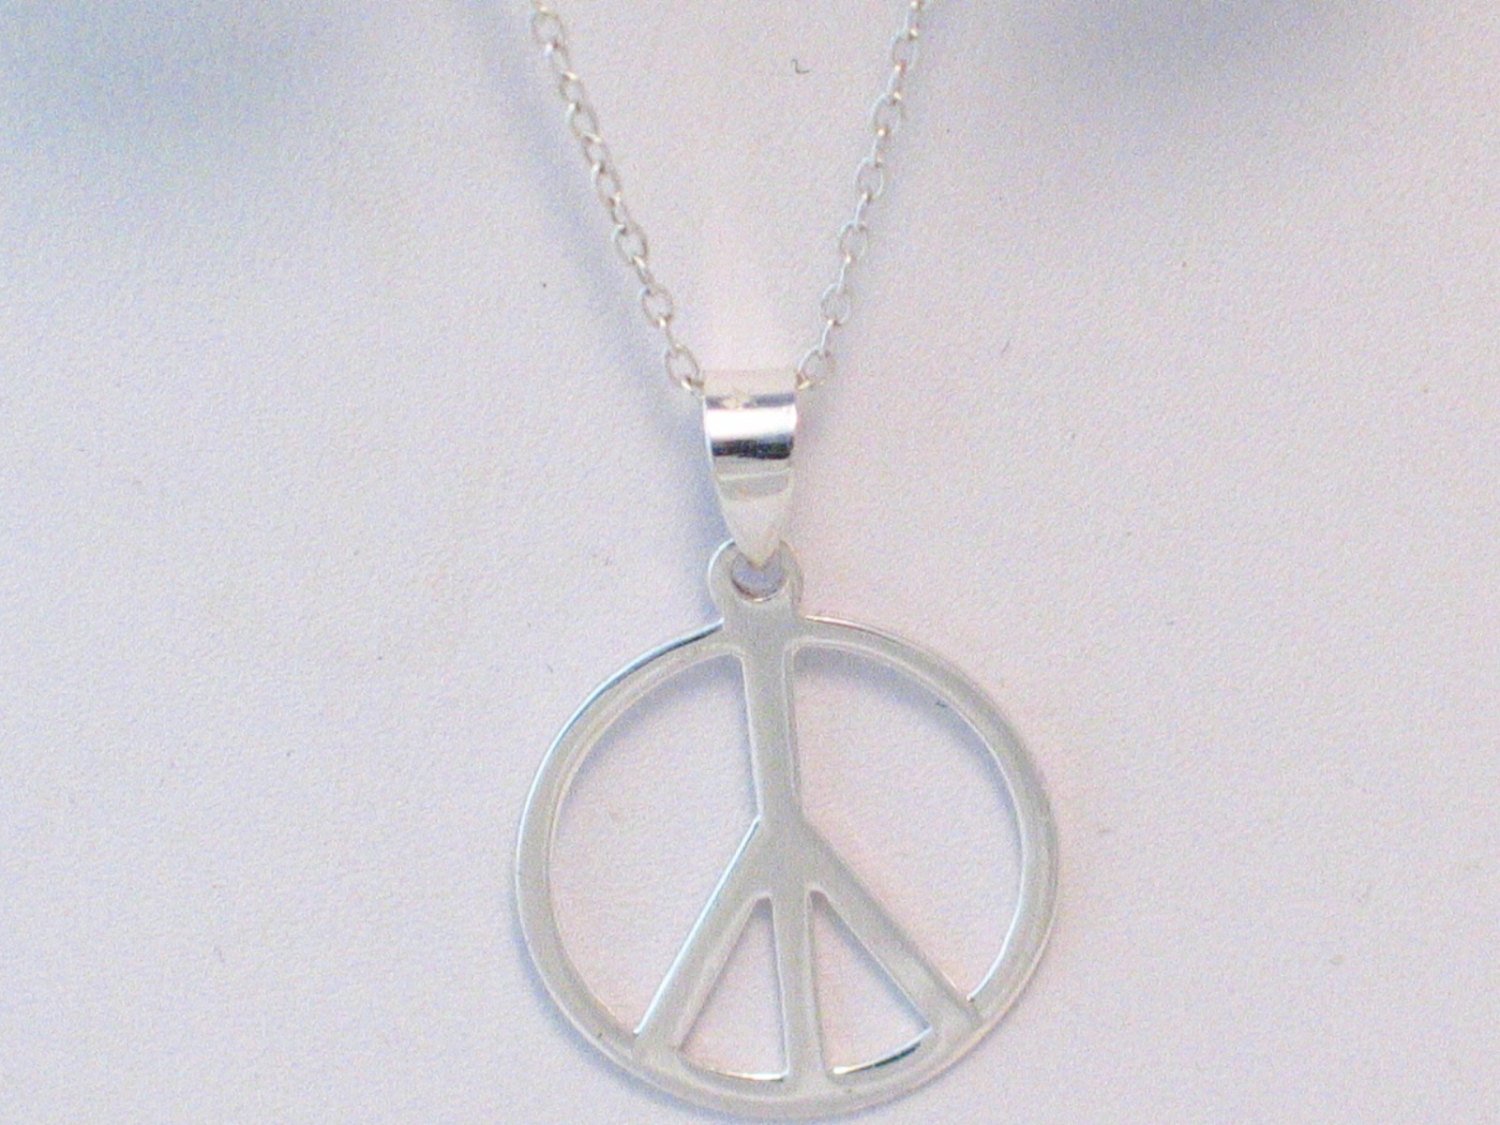 Chain | Womens Sterling Silver Peace Symbol Earrings & Pendant Necklace set | Necklace